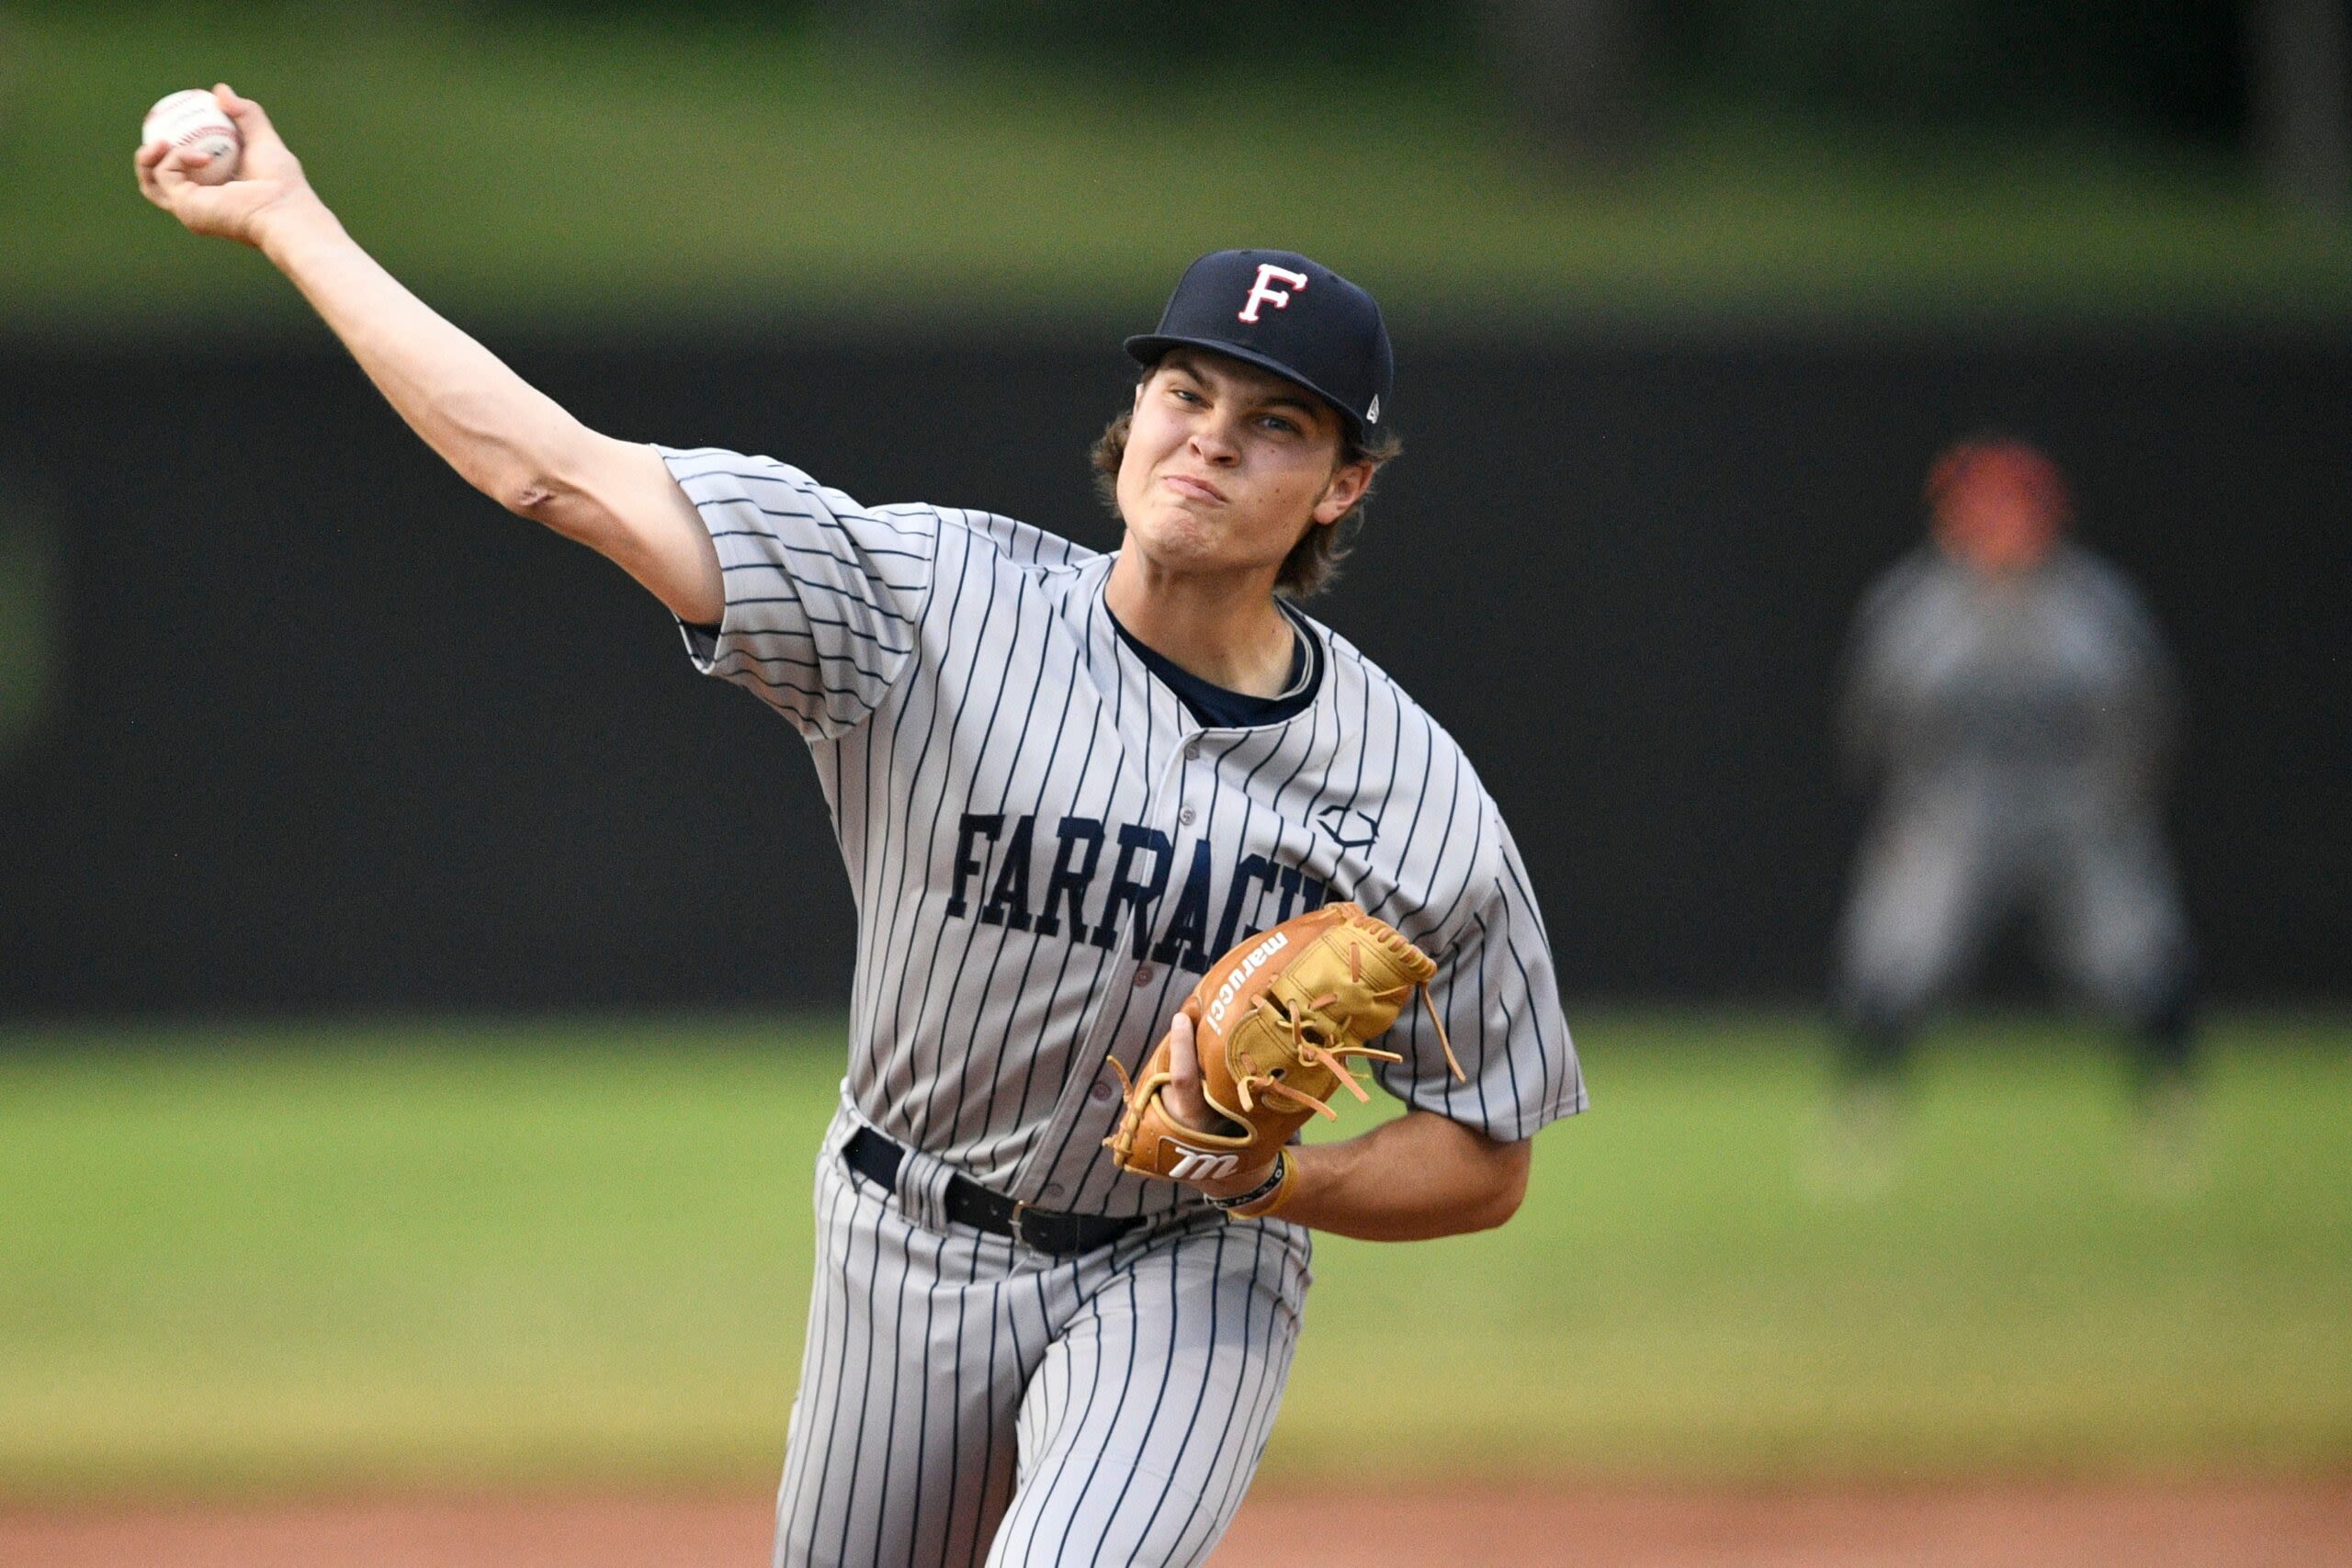 Vols’ signee Stratton Scott pitches combined no-hitter